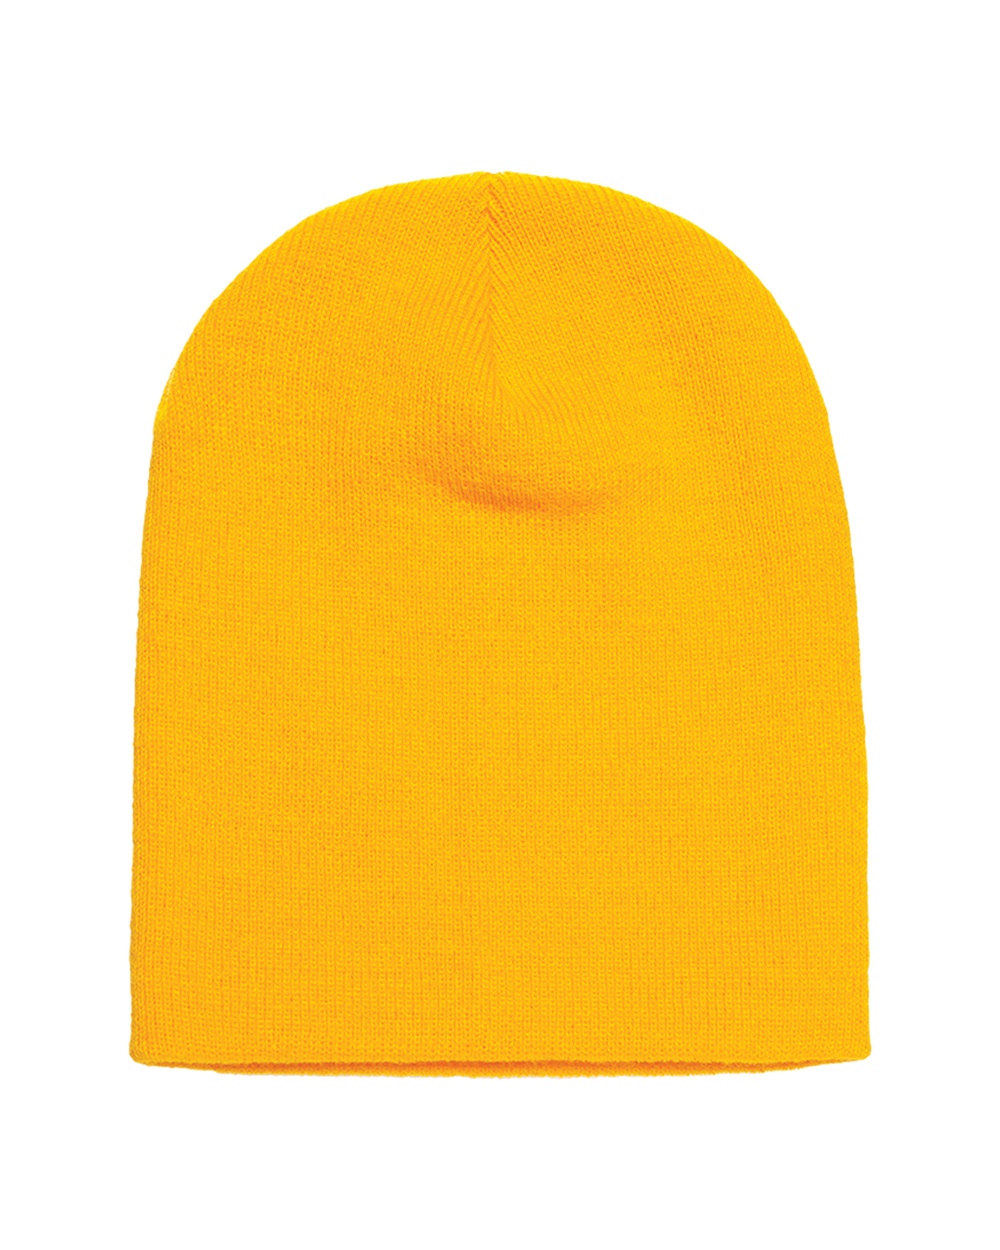 YP Classics™ 1500KC Knit Beanie - One Stop